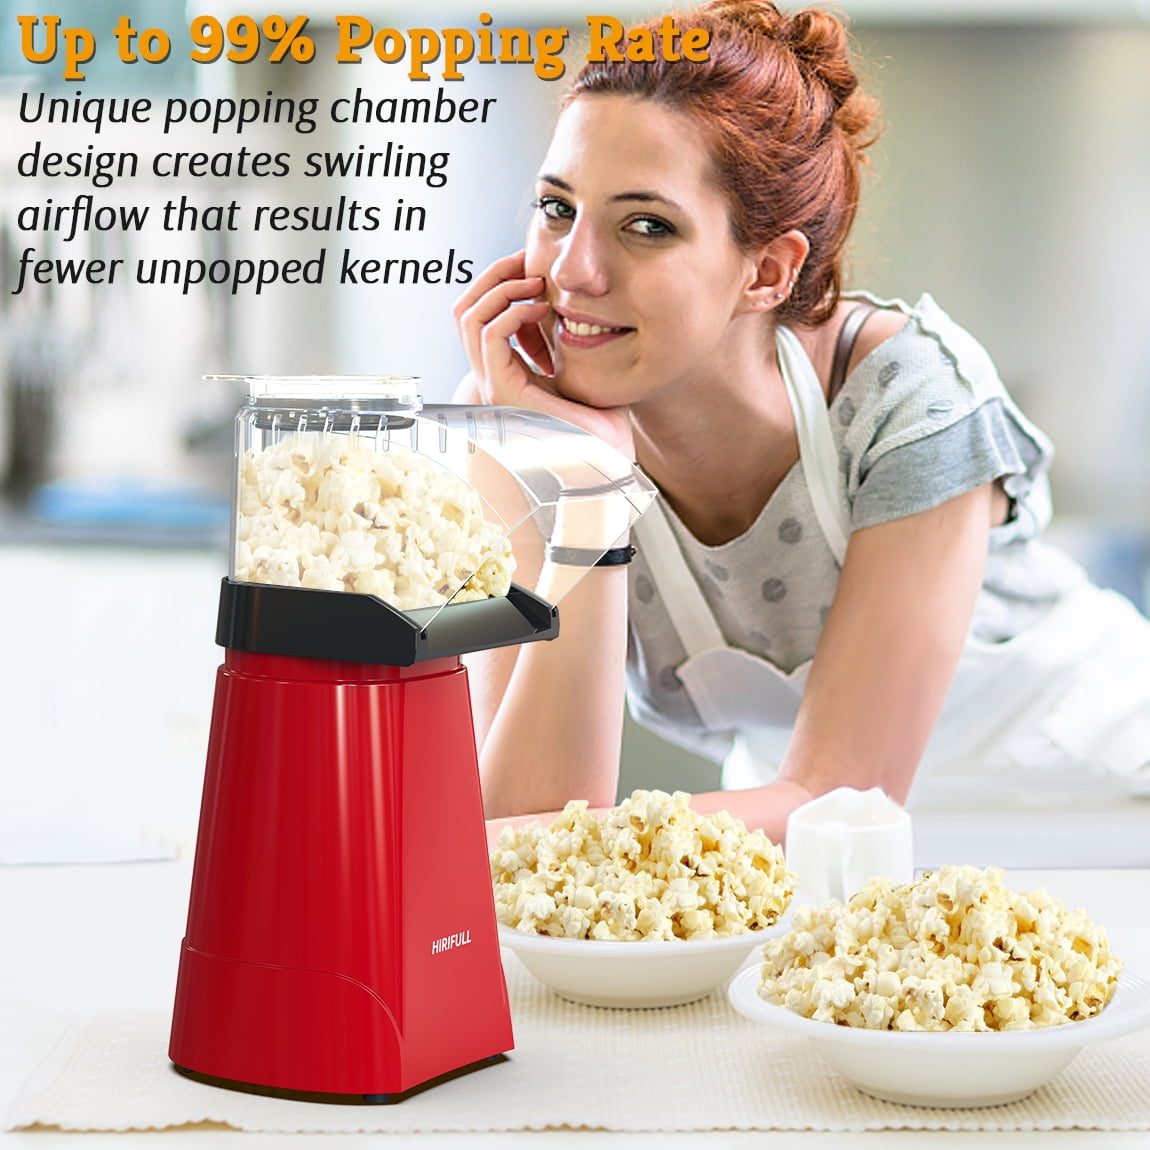 Easy Carry Electric Hot Air Popcorn Maker Retro Machine Cinema  Store,Supermarket,Restaurant Etc Home Gastronomic. From Lewiao0, $72.82